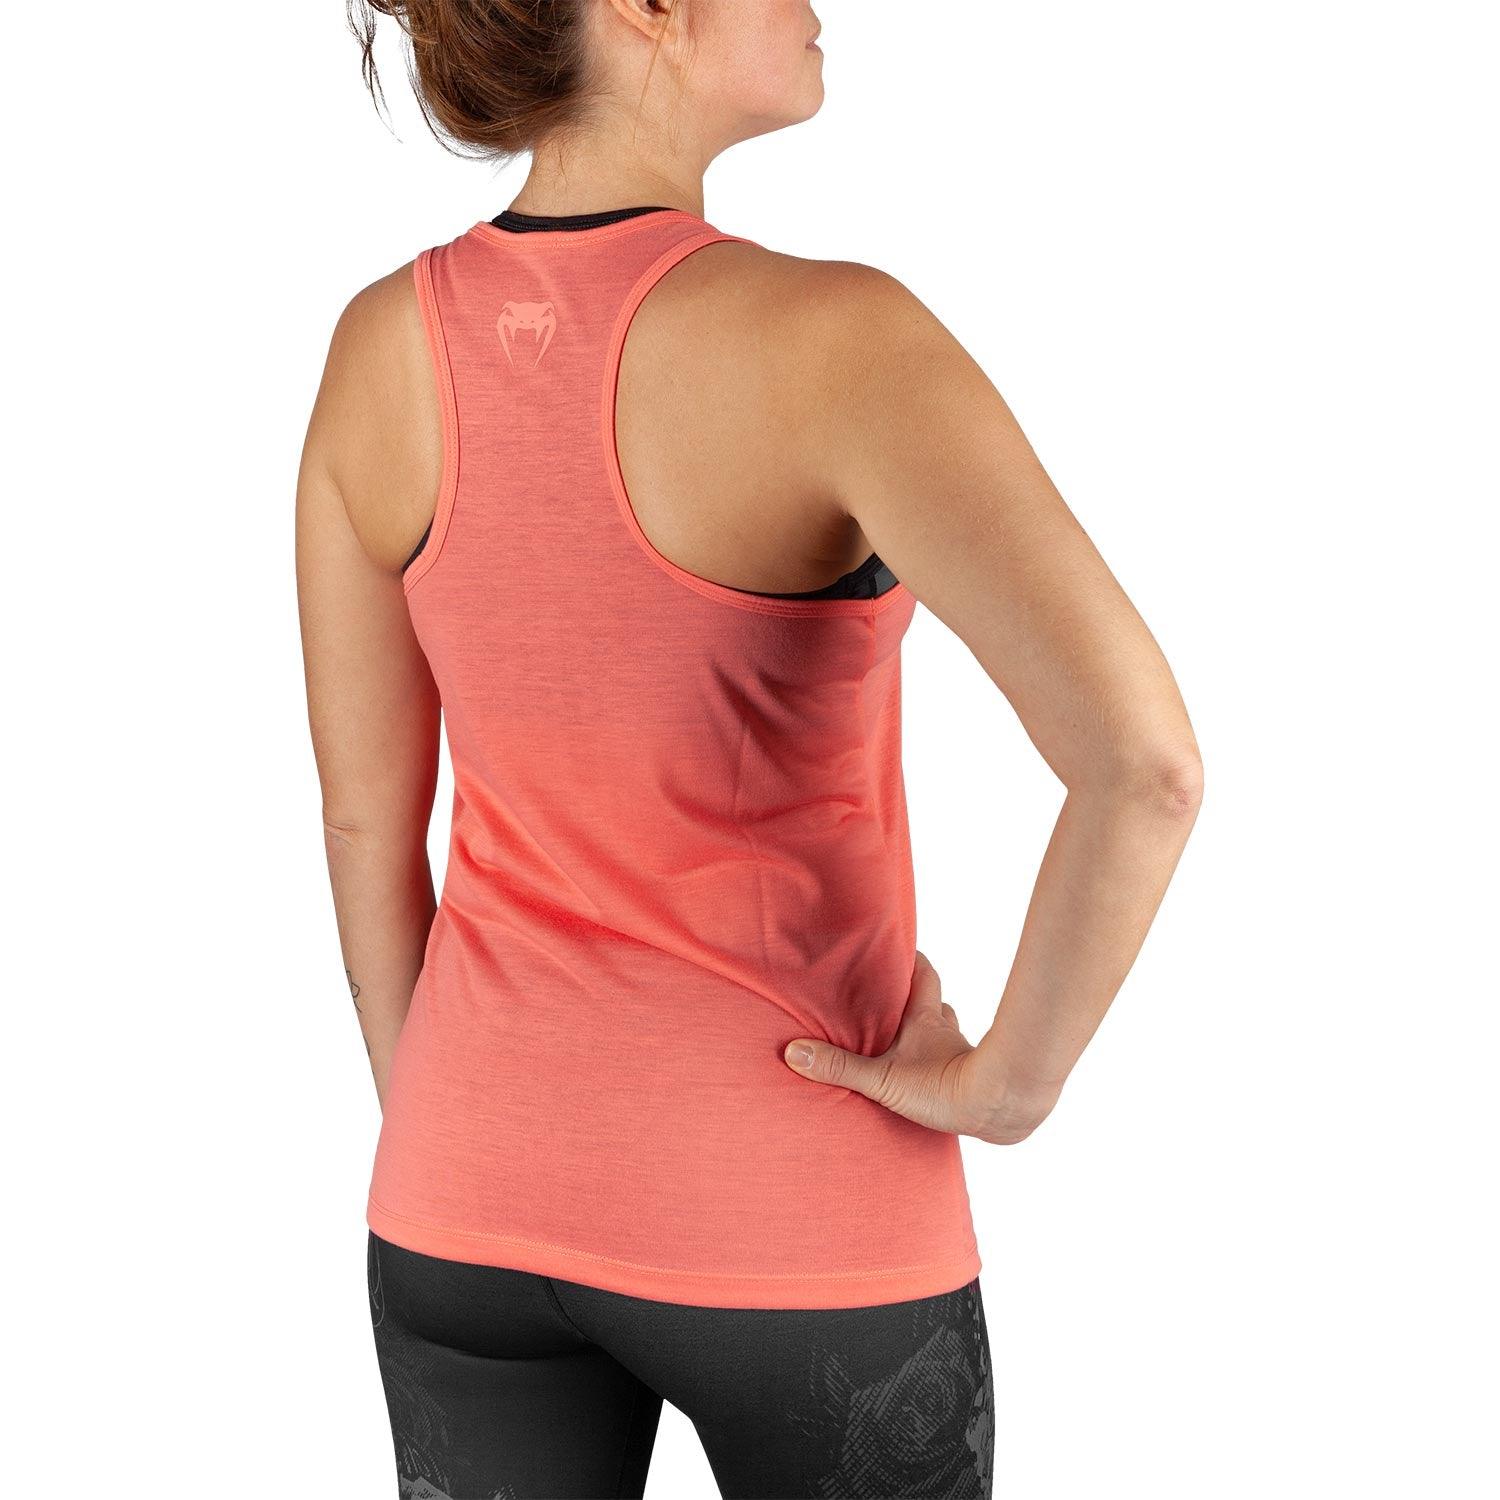 Venum Classic Tank Top - For Women - Pink Picture 2